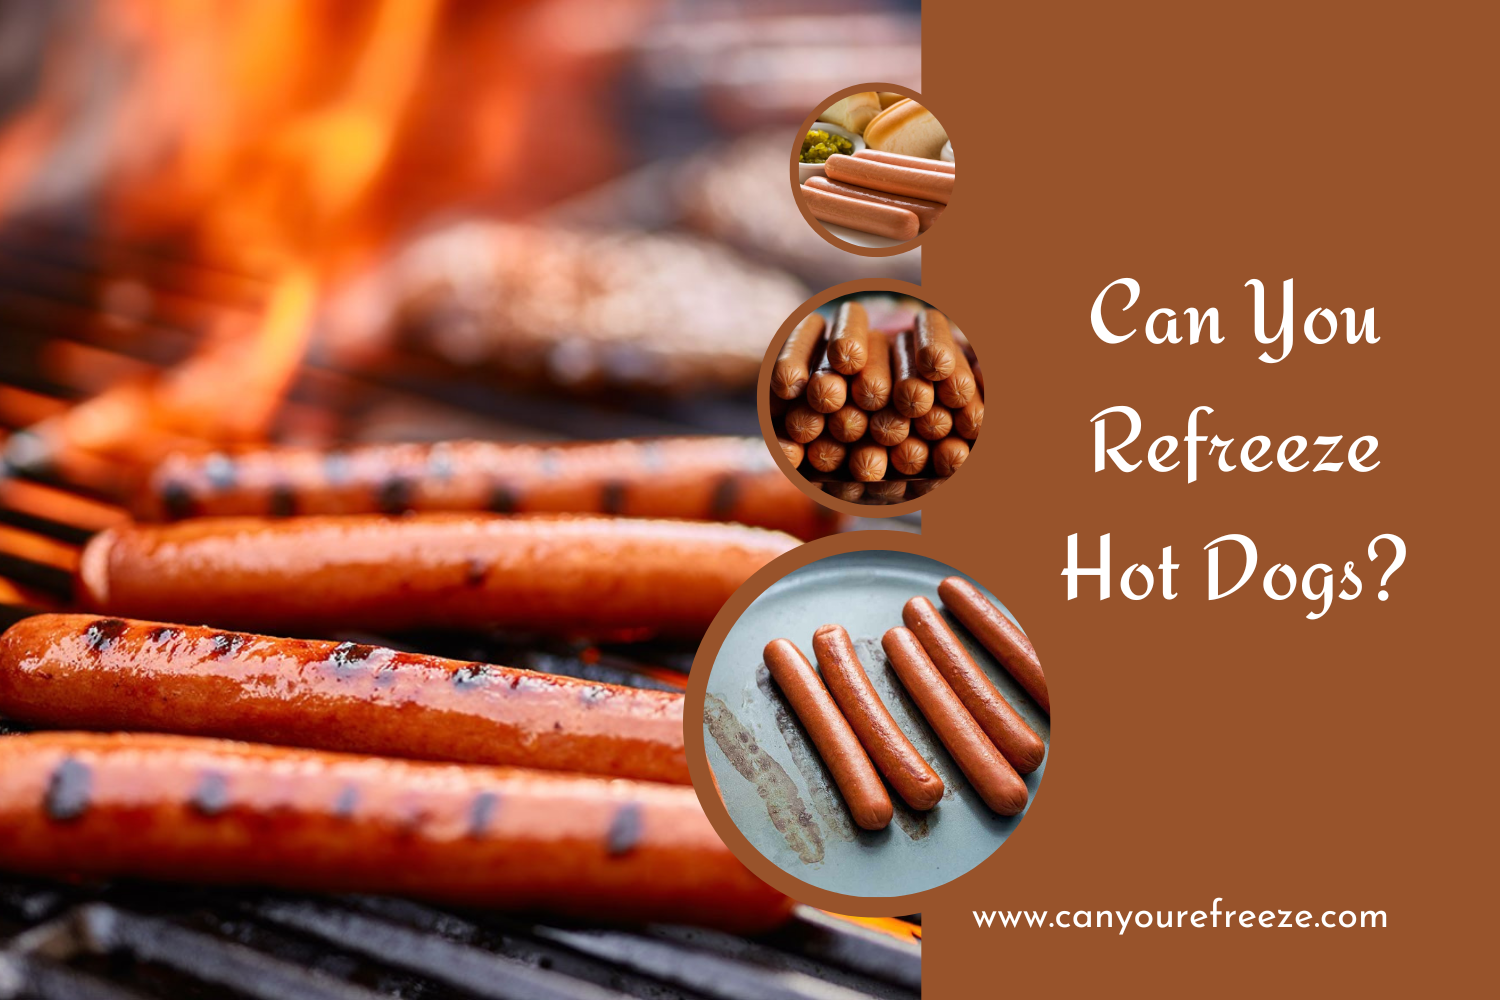 Can You Refreeze Hot Dogs